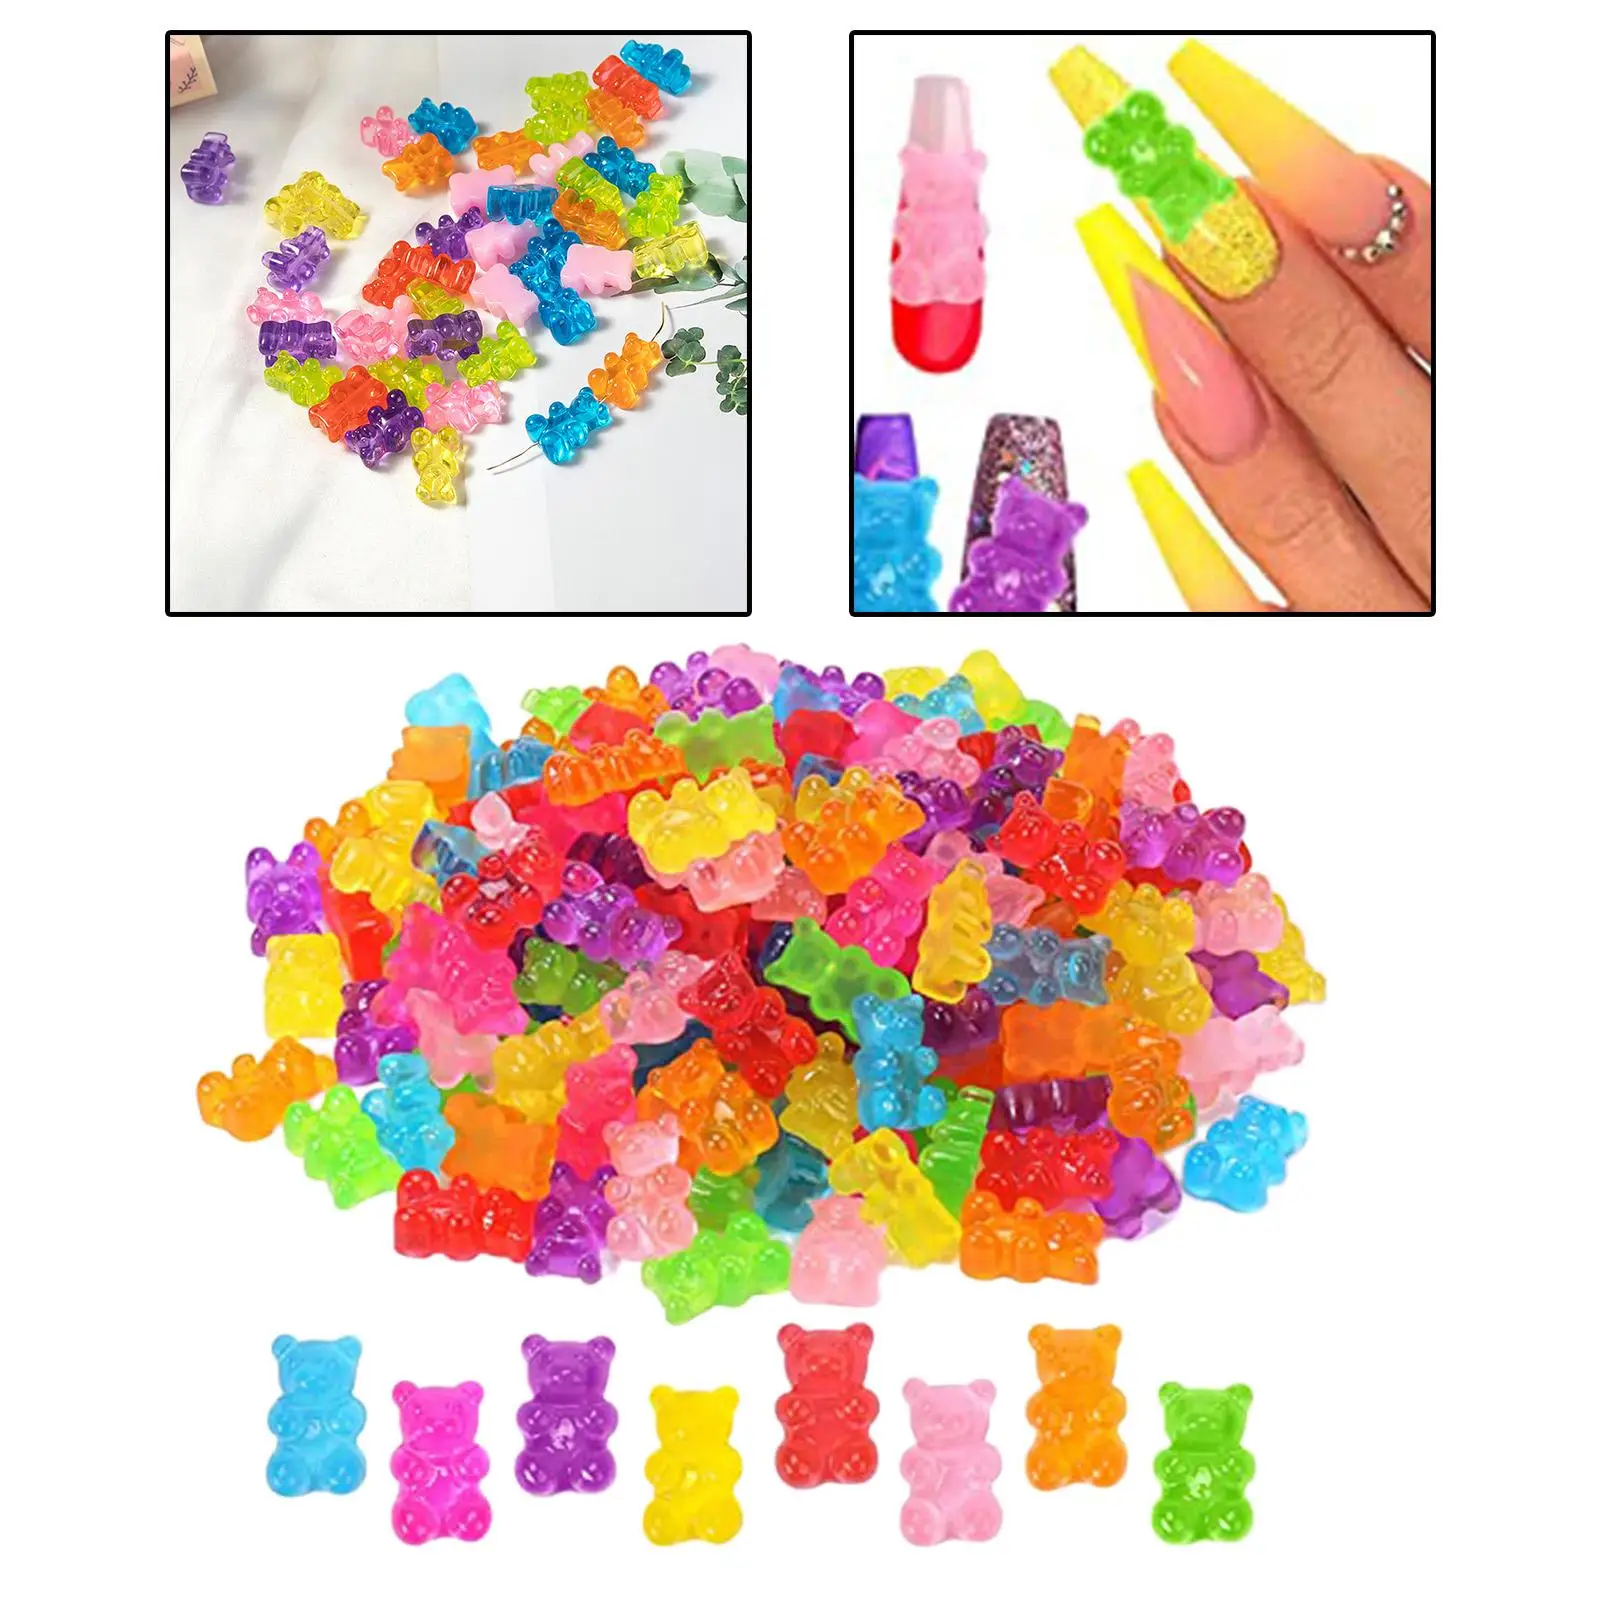 50 Pieces Gummy Bear Charms with Hole Flatback Resin for Children